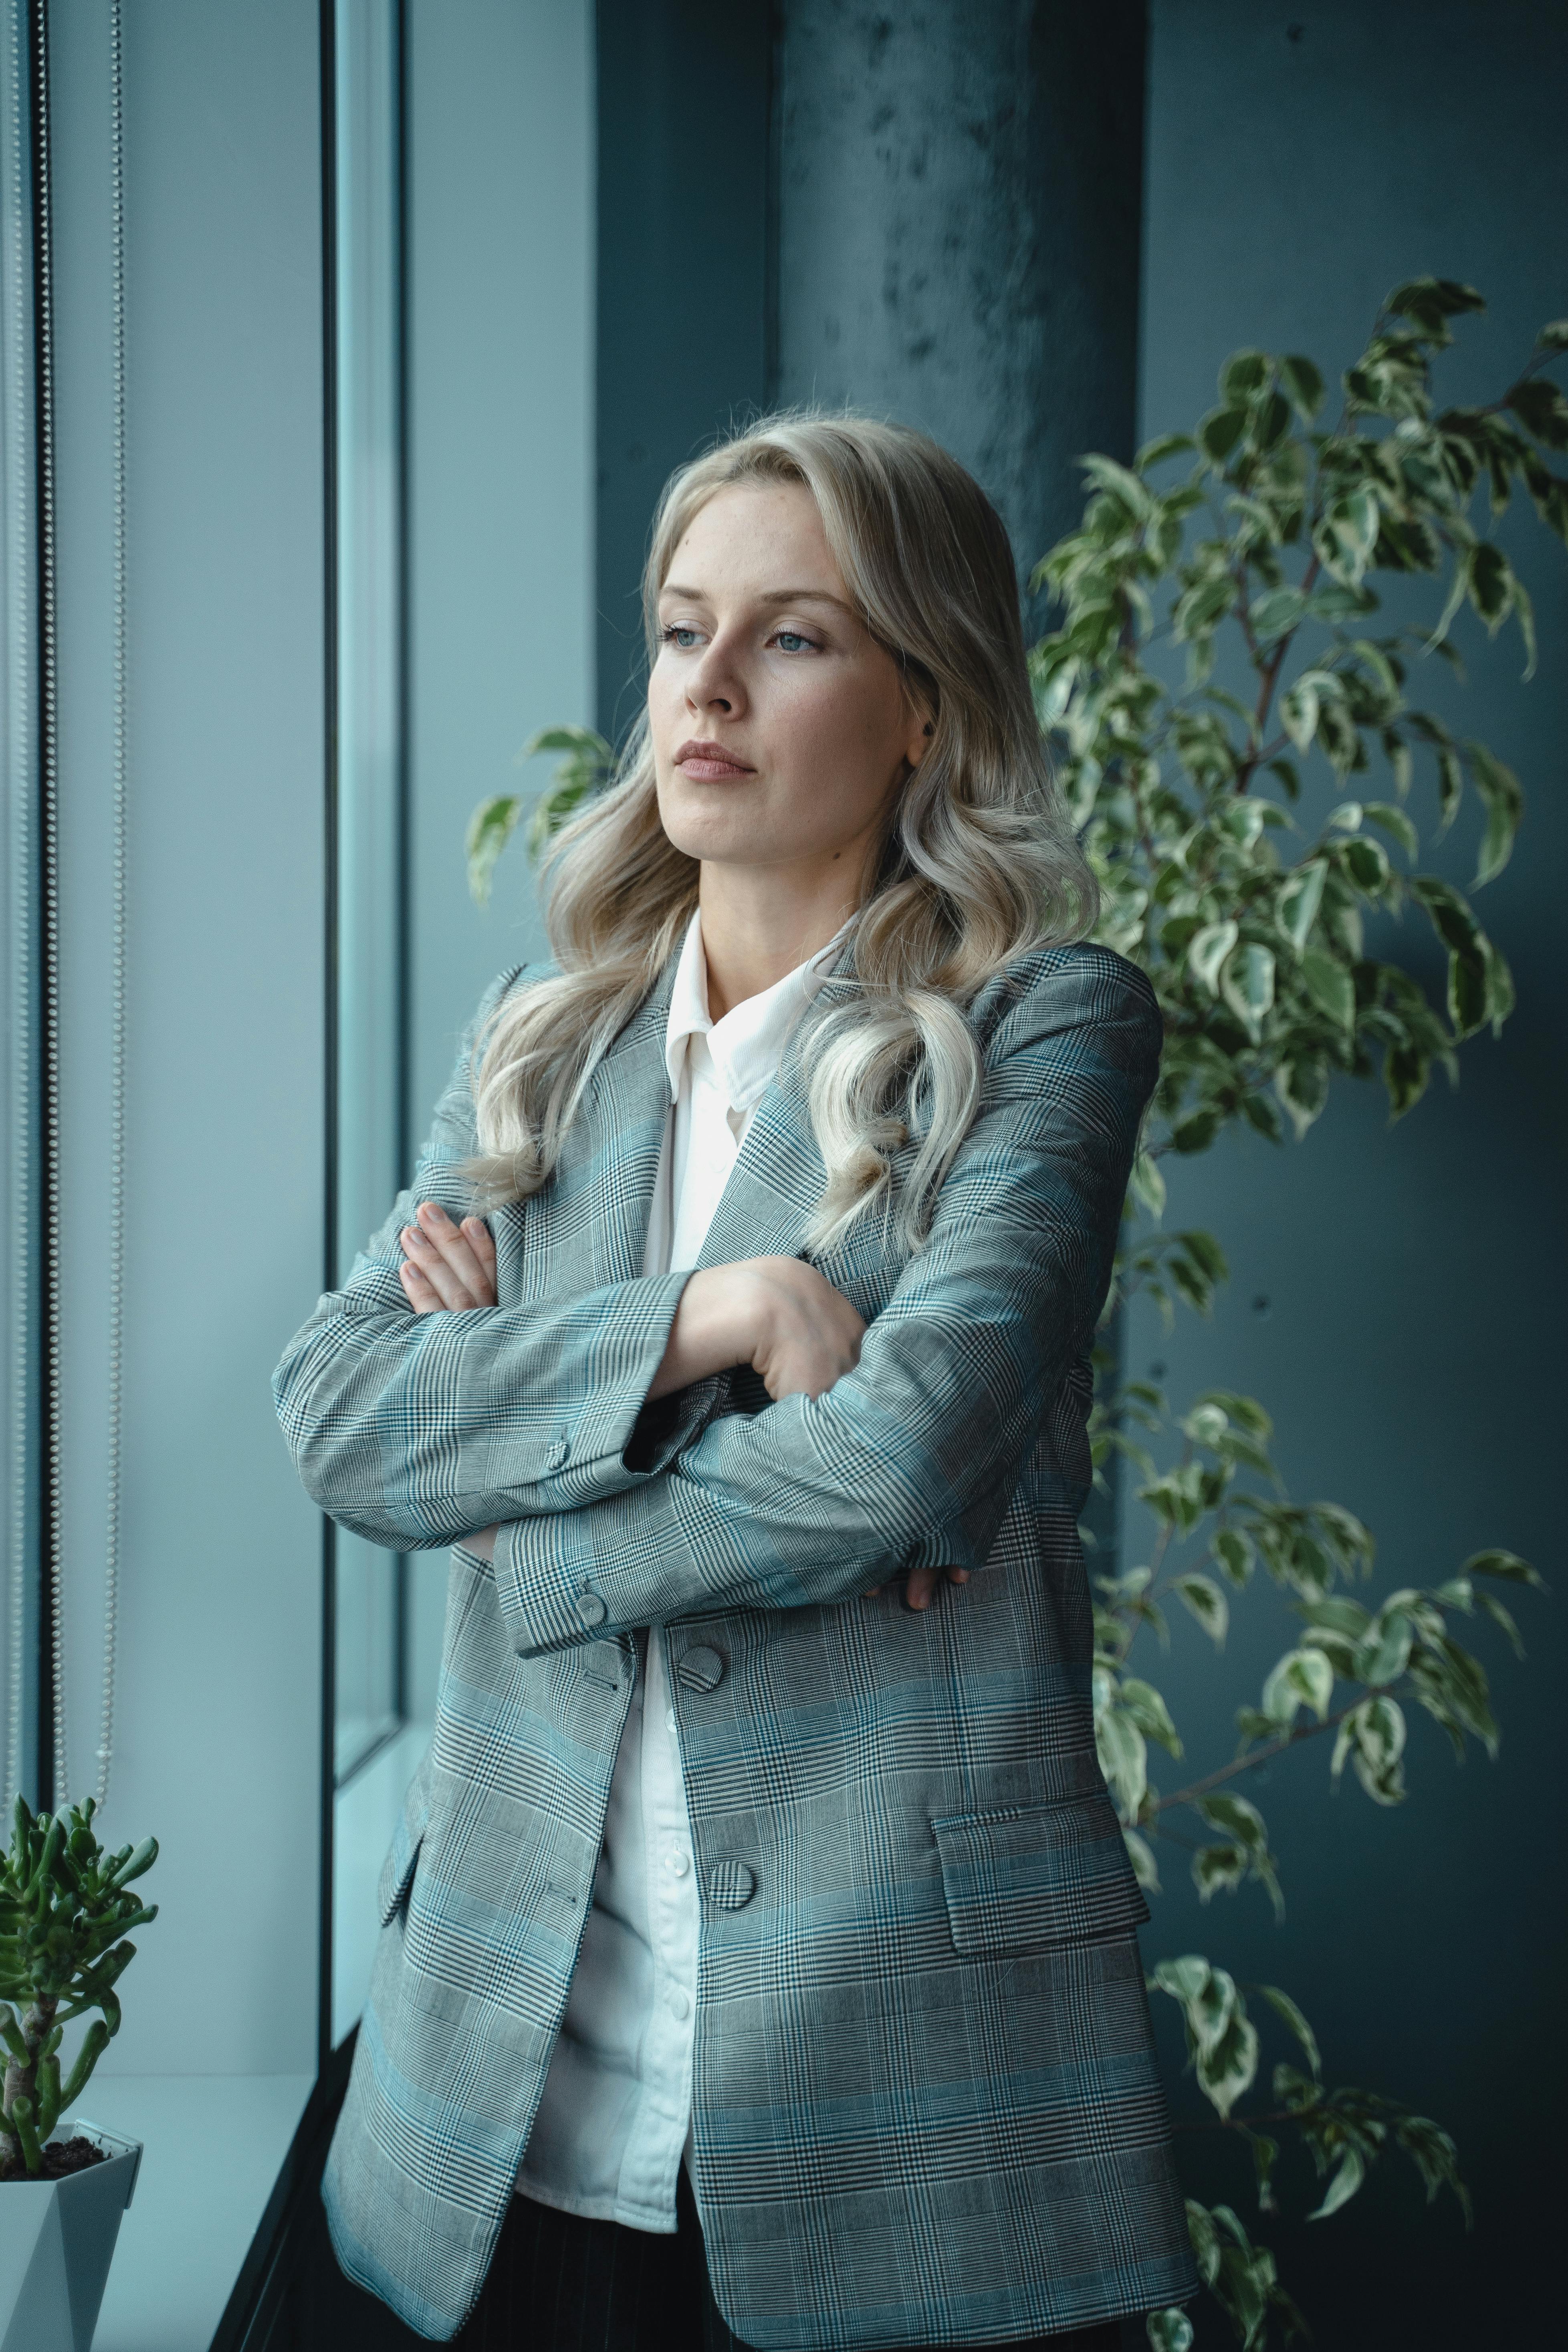 woman in gray blazer standing near green plant with a serious look